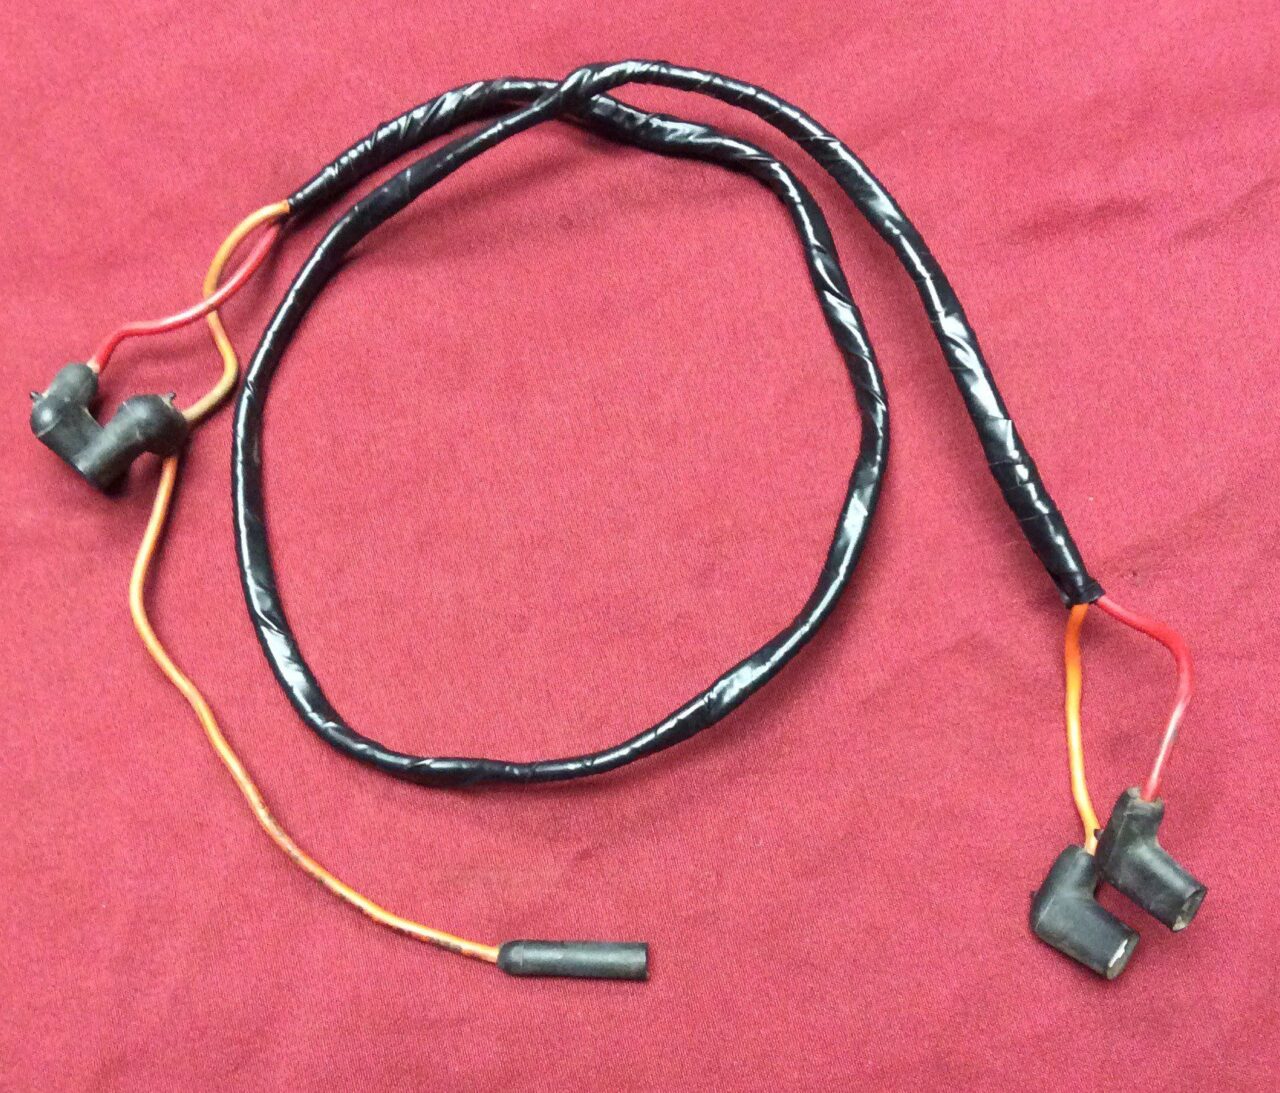 heater wire harness, used